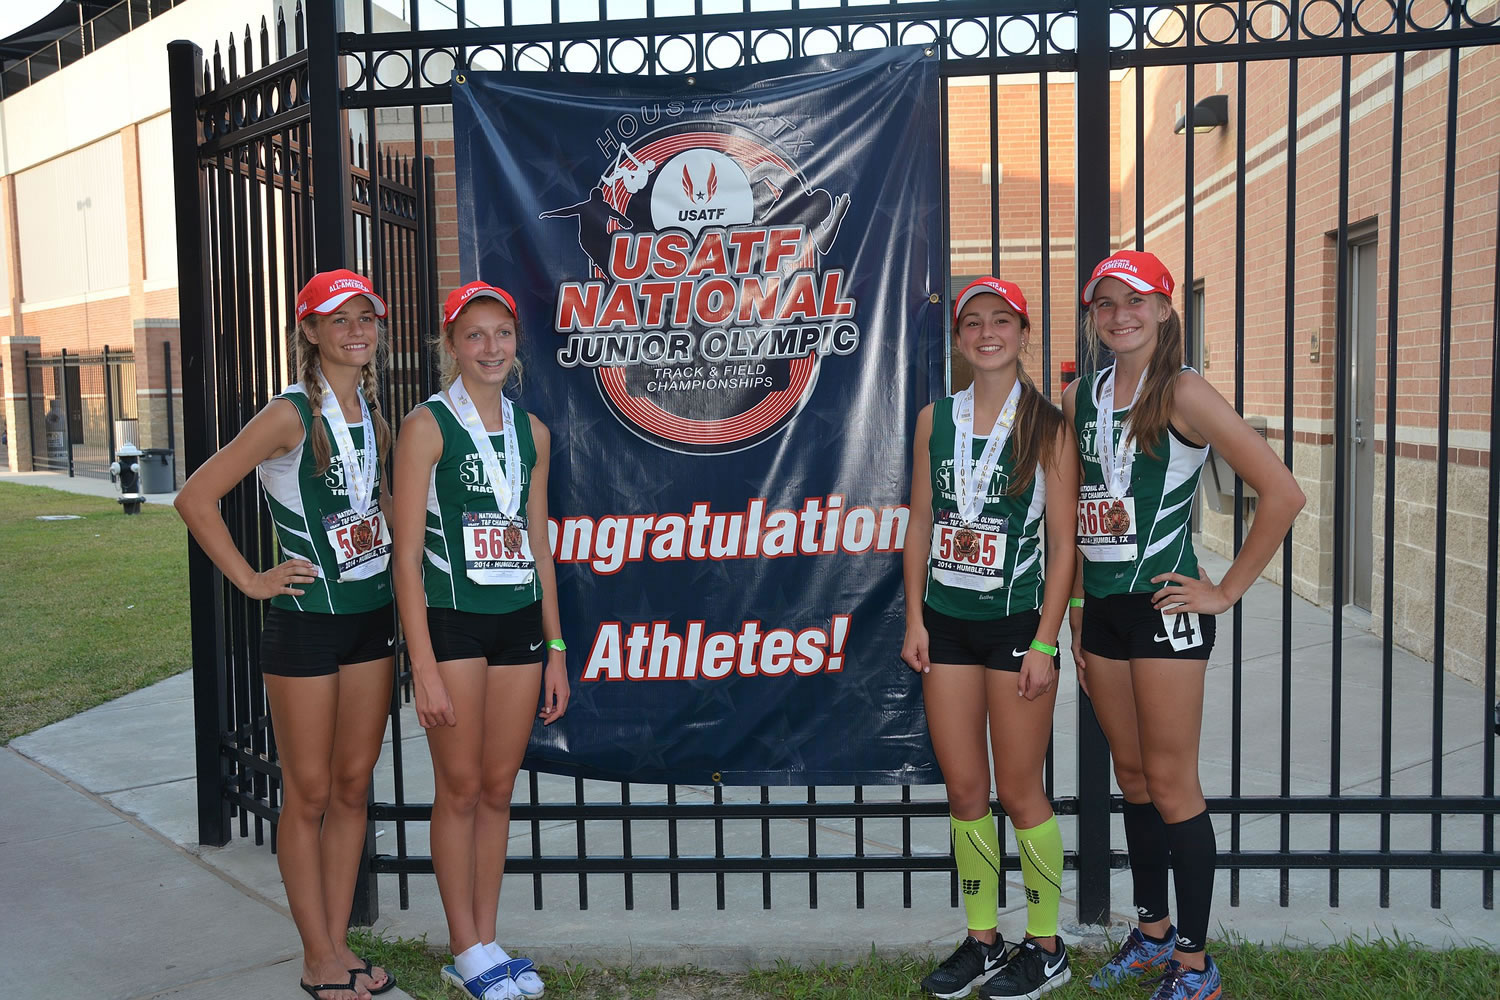 Members of the Evergreen Storm Track Club 4x800 meter relay pose by a banner at the USATF National Junior Olympic Championships on Wednesday in Houston. The team placed third among girls ages 13-14.